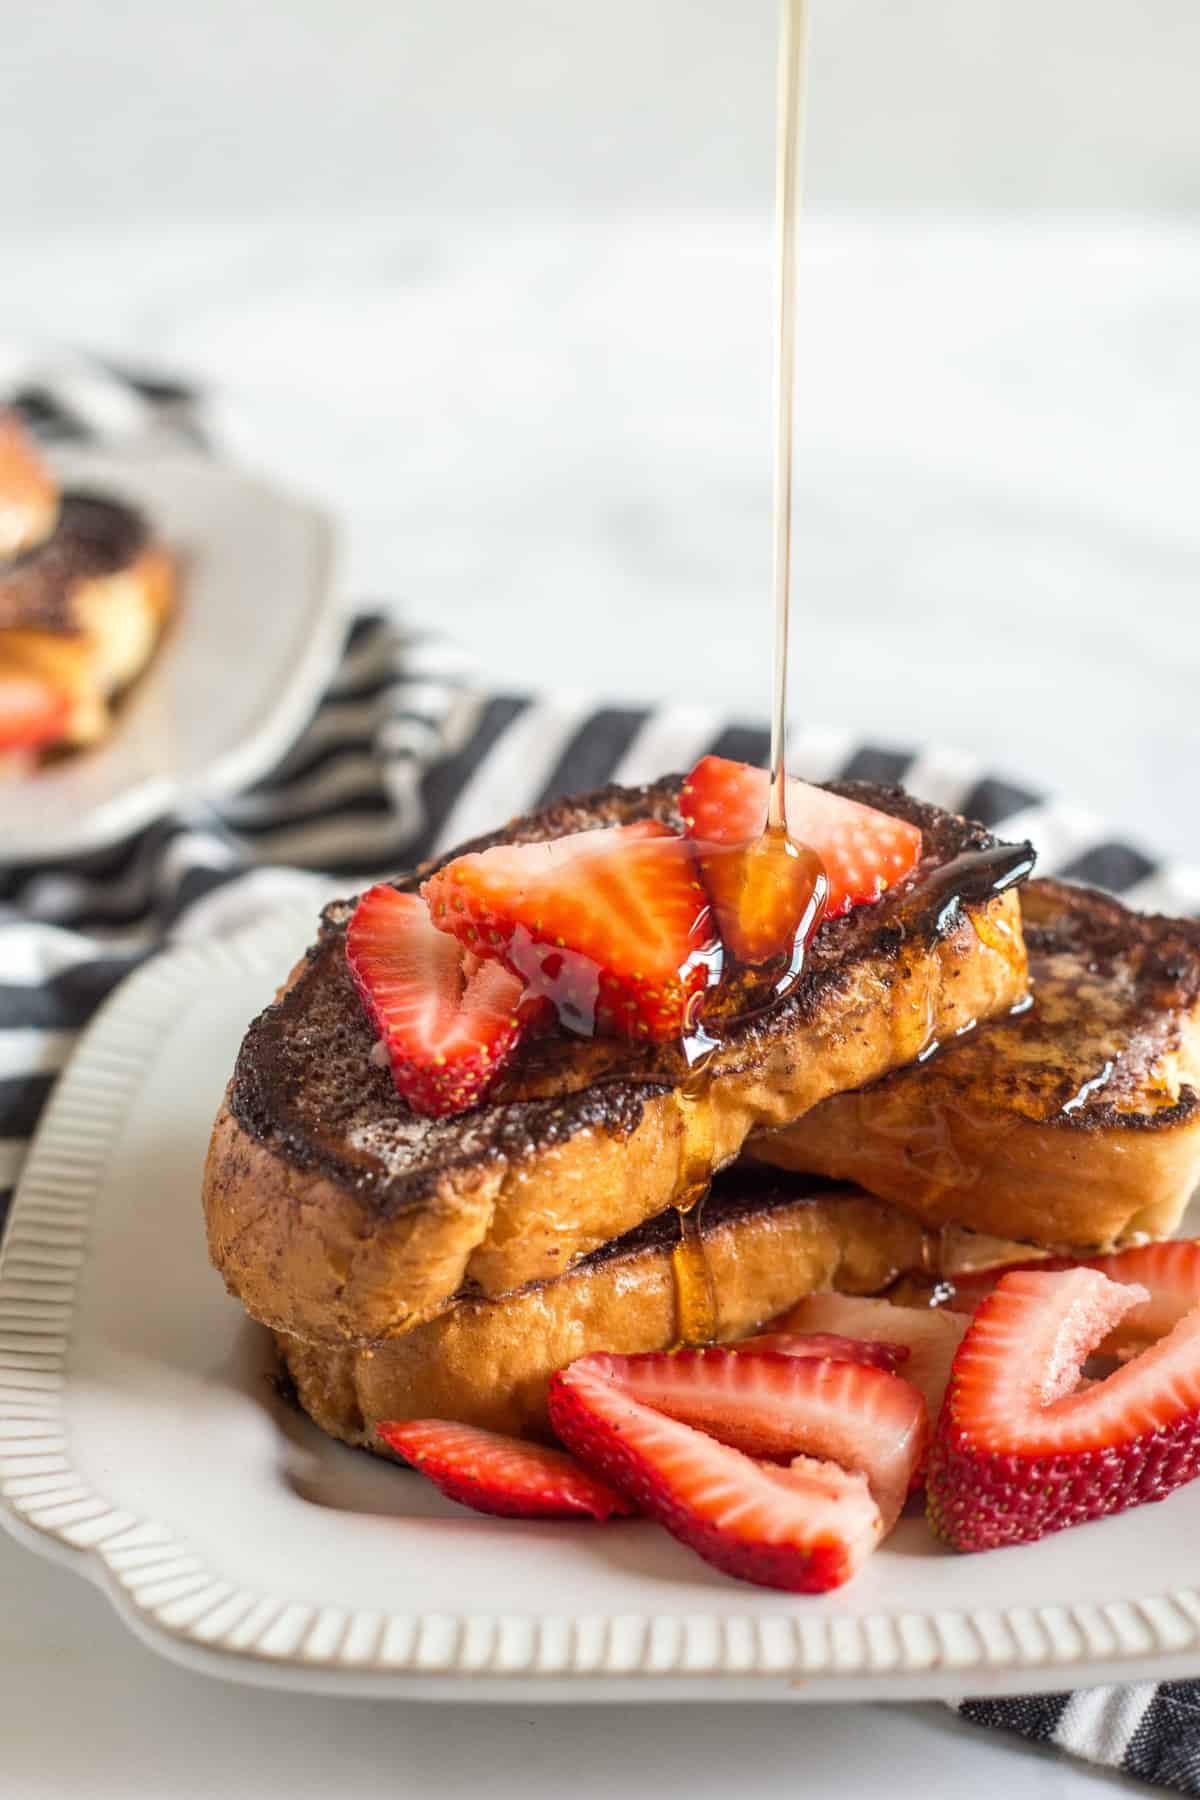 French toast with a drizzle of maple syrup.